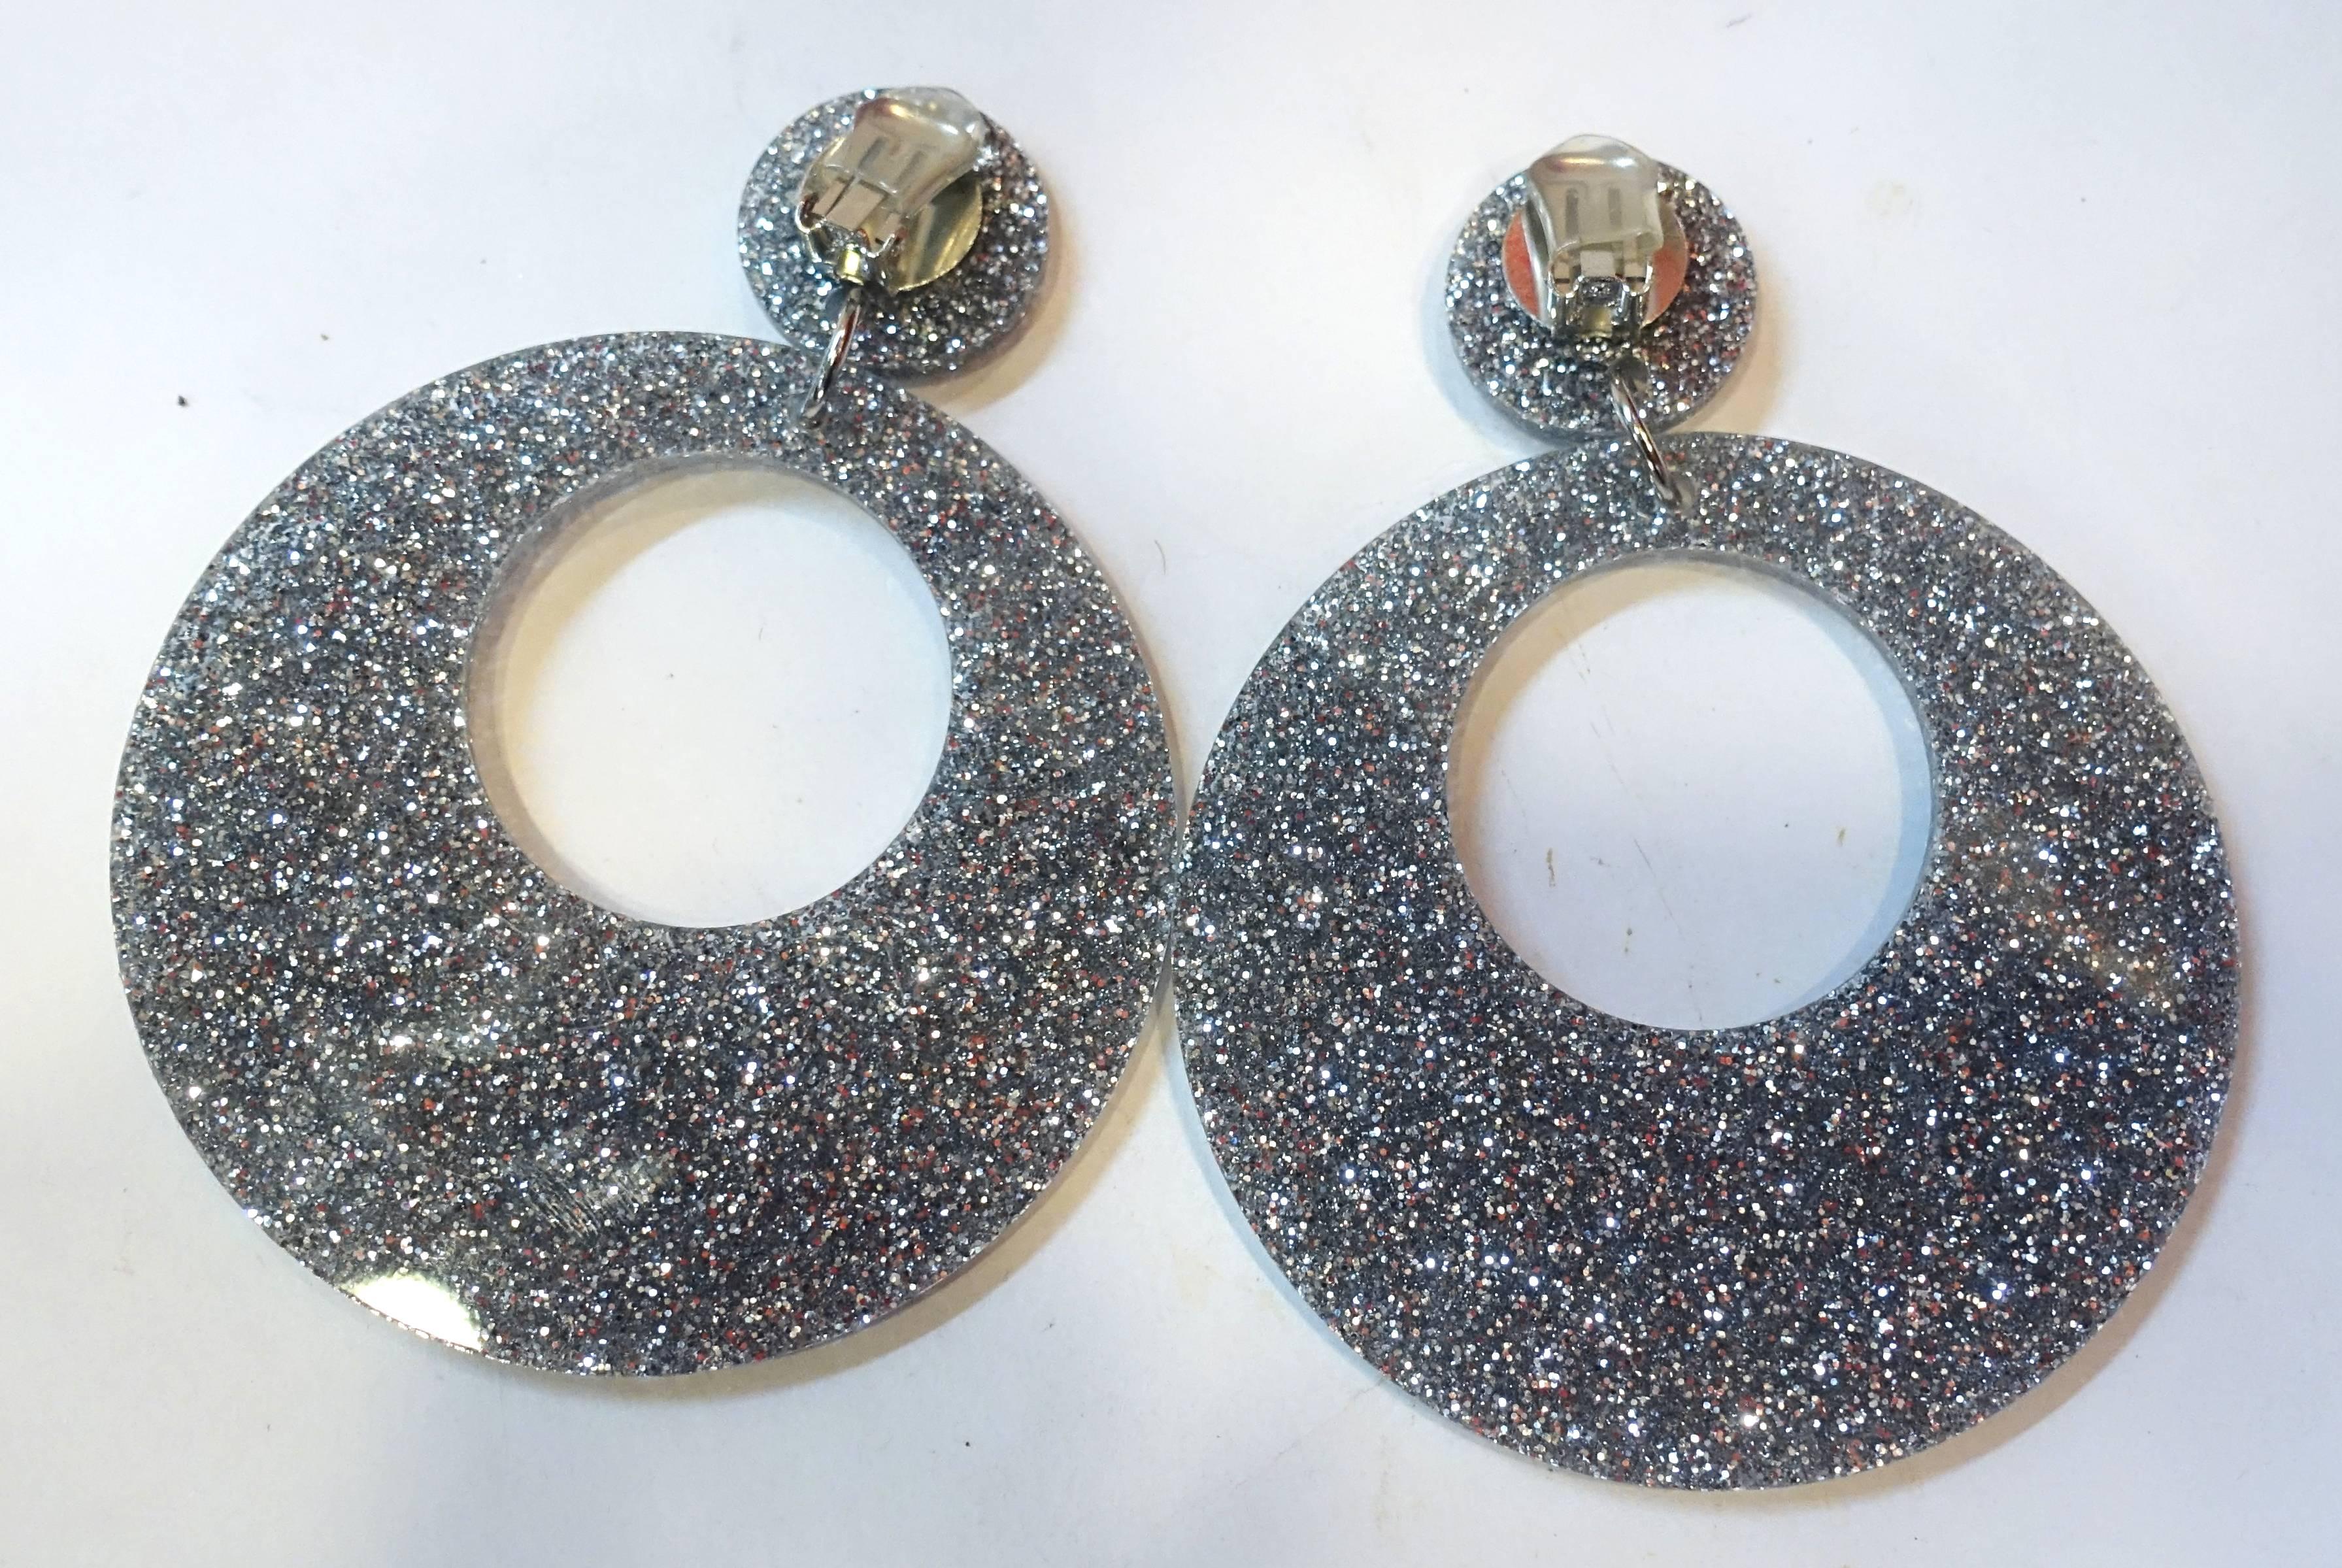 These clip earrings are so campy, I had to buy them in grey. They each have a grey plastic iridescent round disk at the top that connects to a huge dangling grey hoop at the bottom. They measure 4-1/8” long and 3-1/4” wide. You’ll certainly be